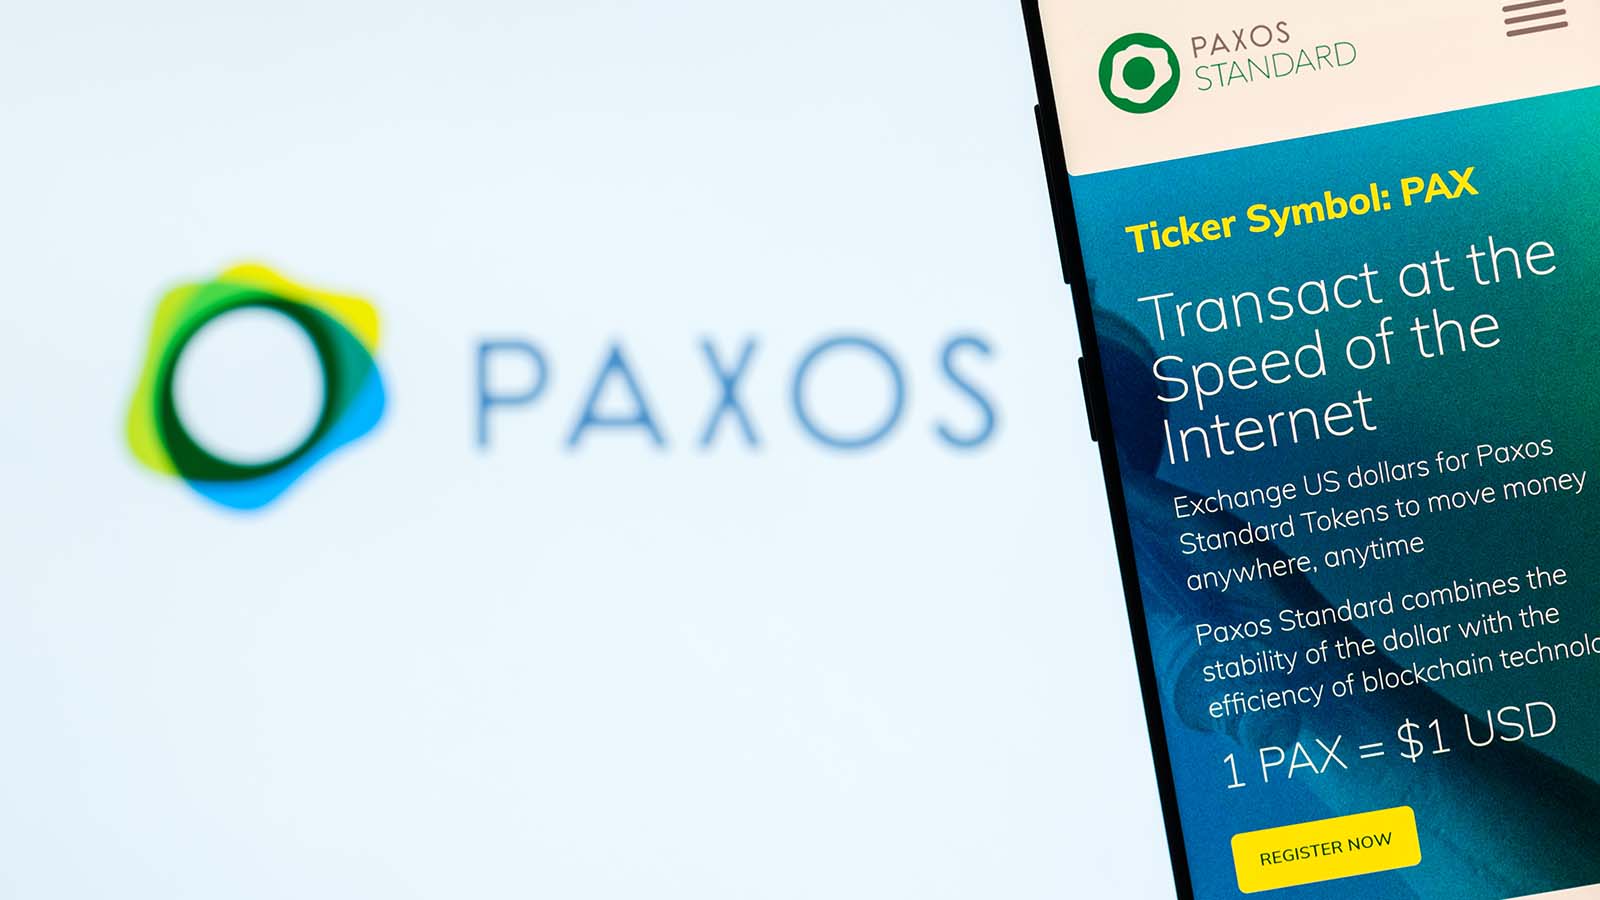 The website for the Paxos (PAX) crypto displayed in front of a logo background.